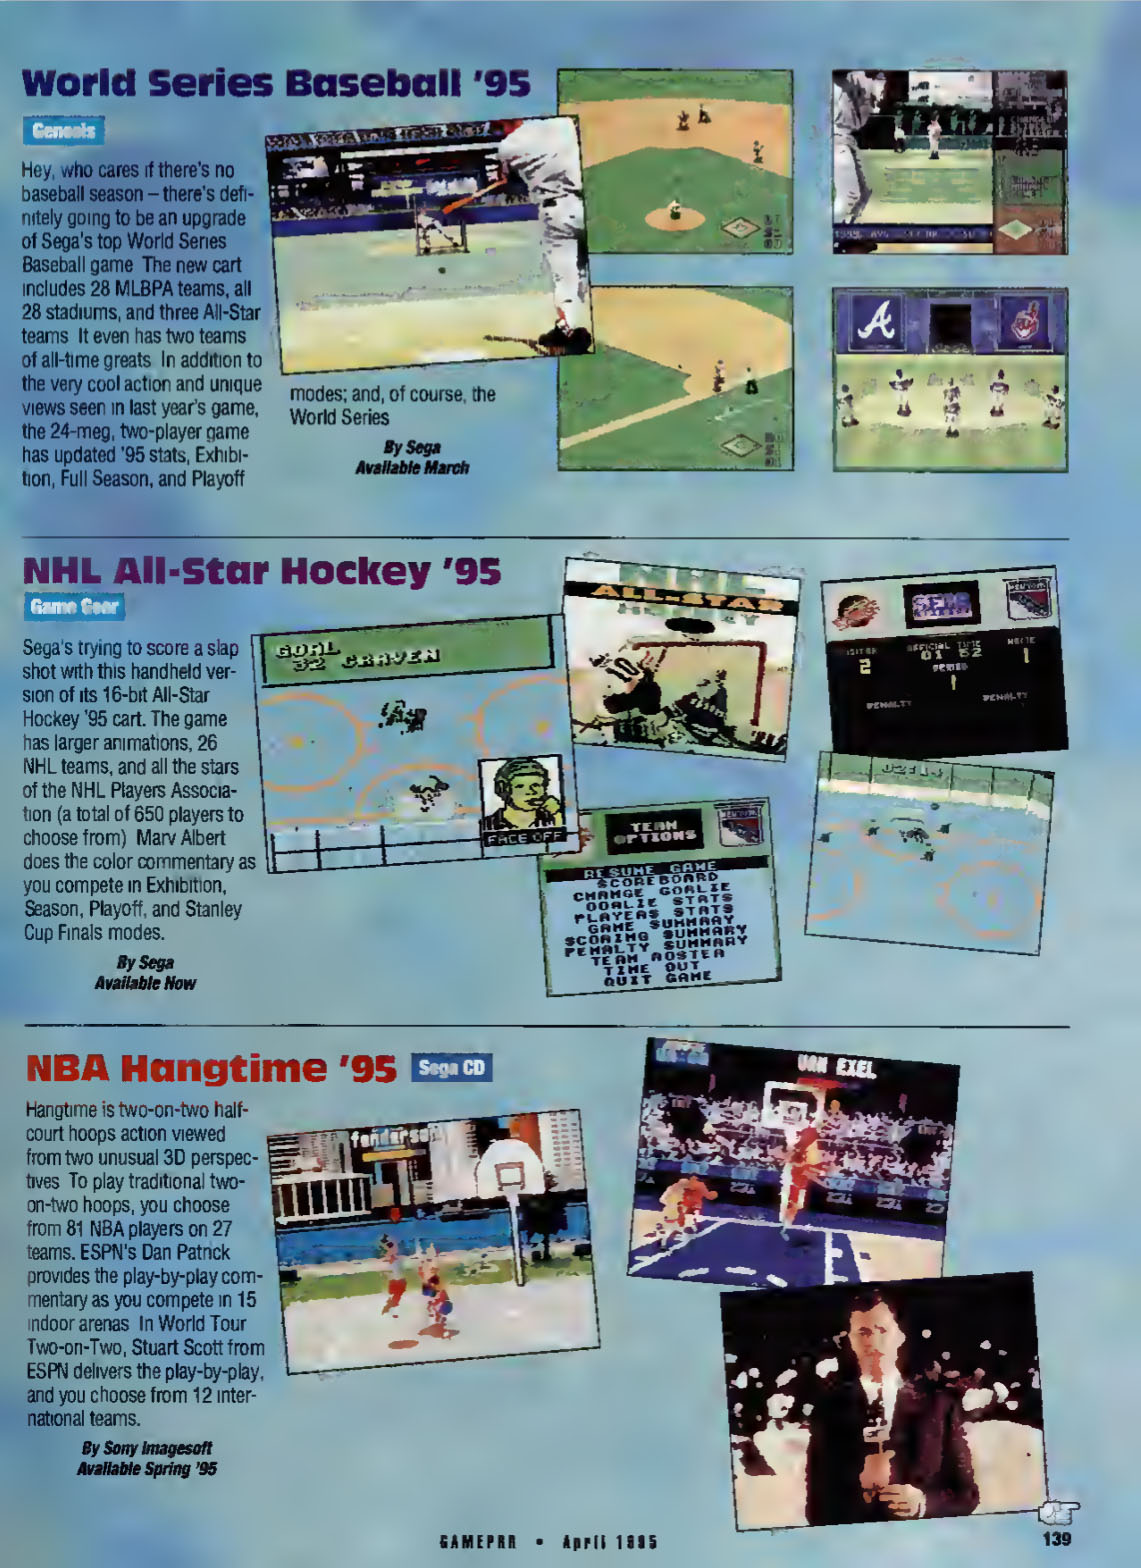 World Series Baseball '95 Preview, GamePro April 1995 page 139